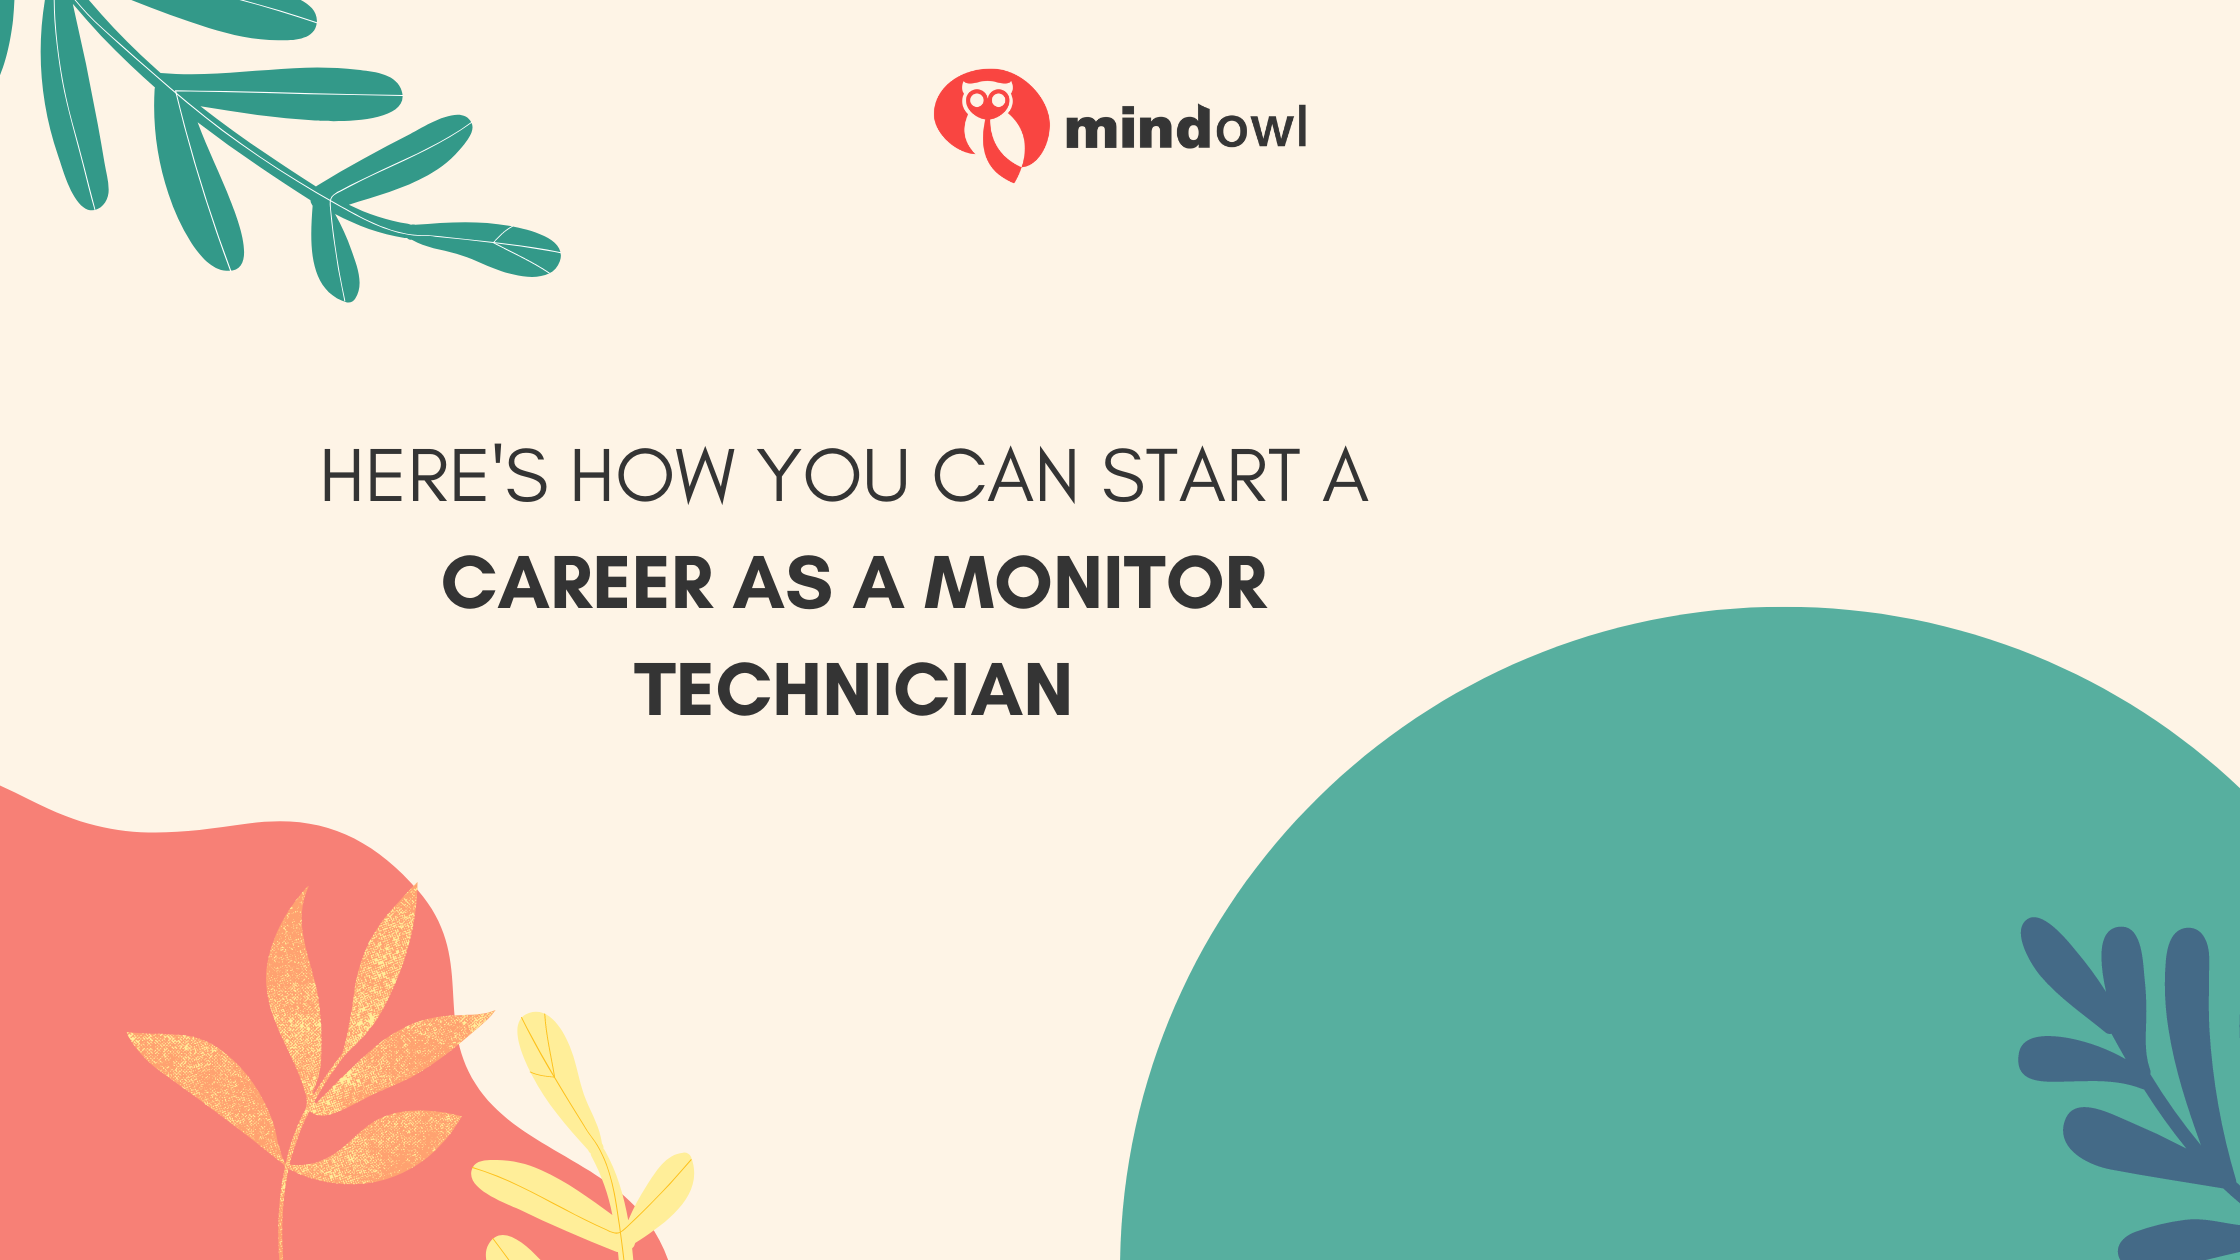 Here’s How You Can Start a Career as a Monitor Technician